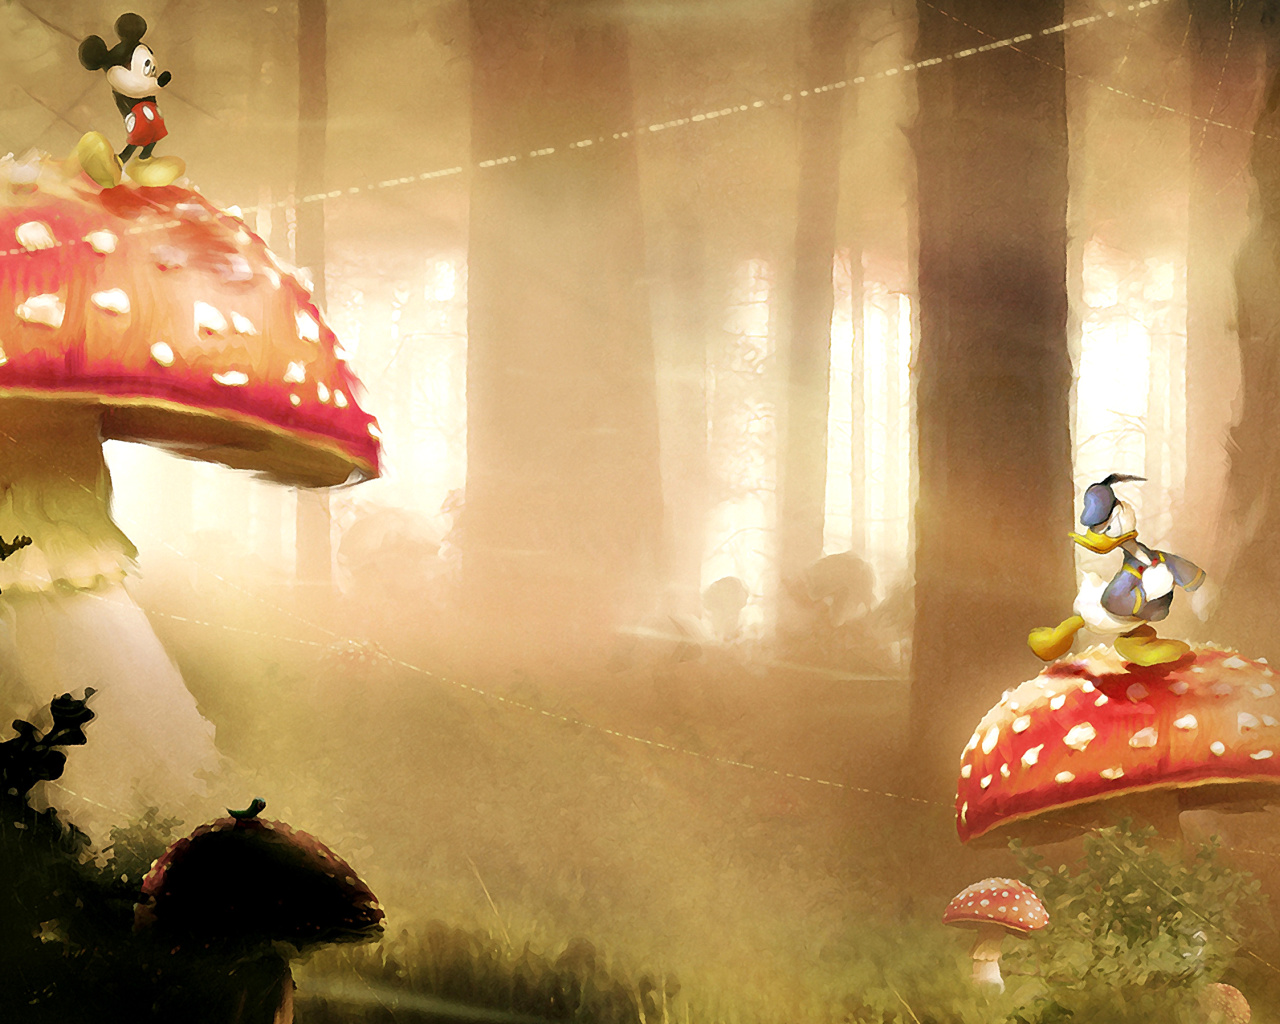 Das Mickey Mouse and Donald Duck Wallpaper 1280x1024